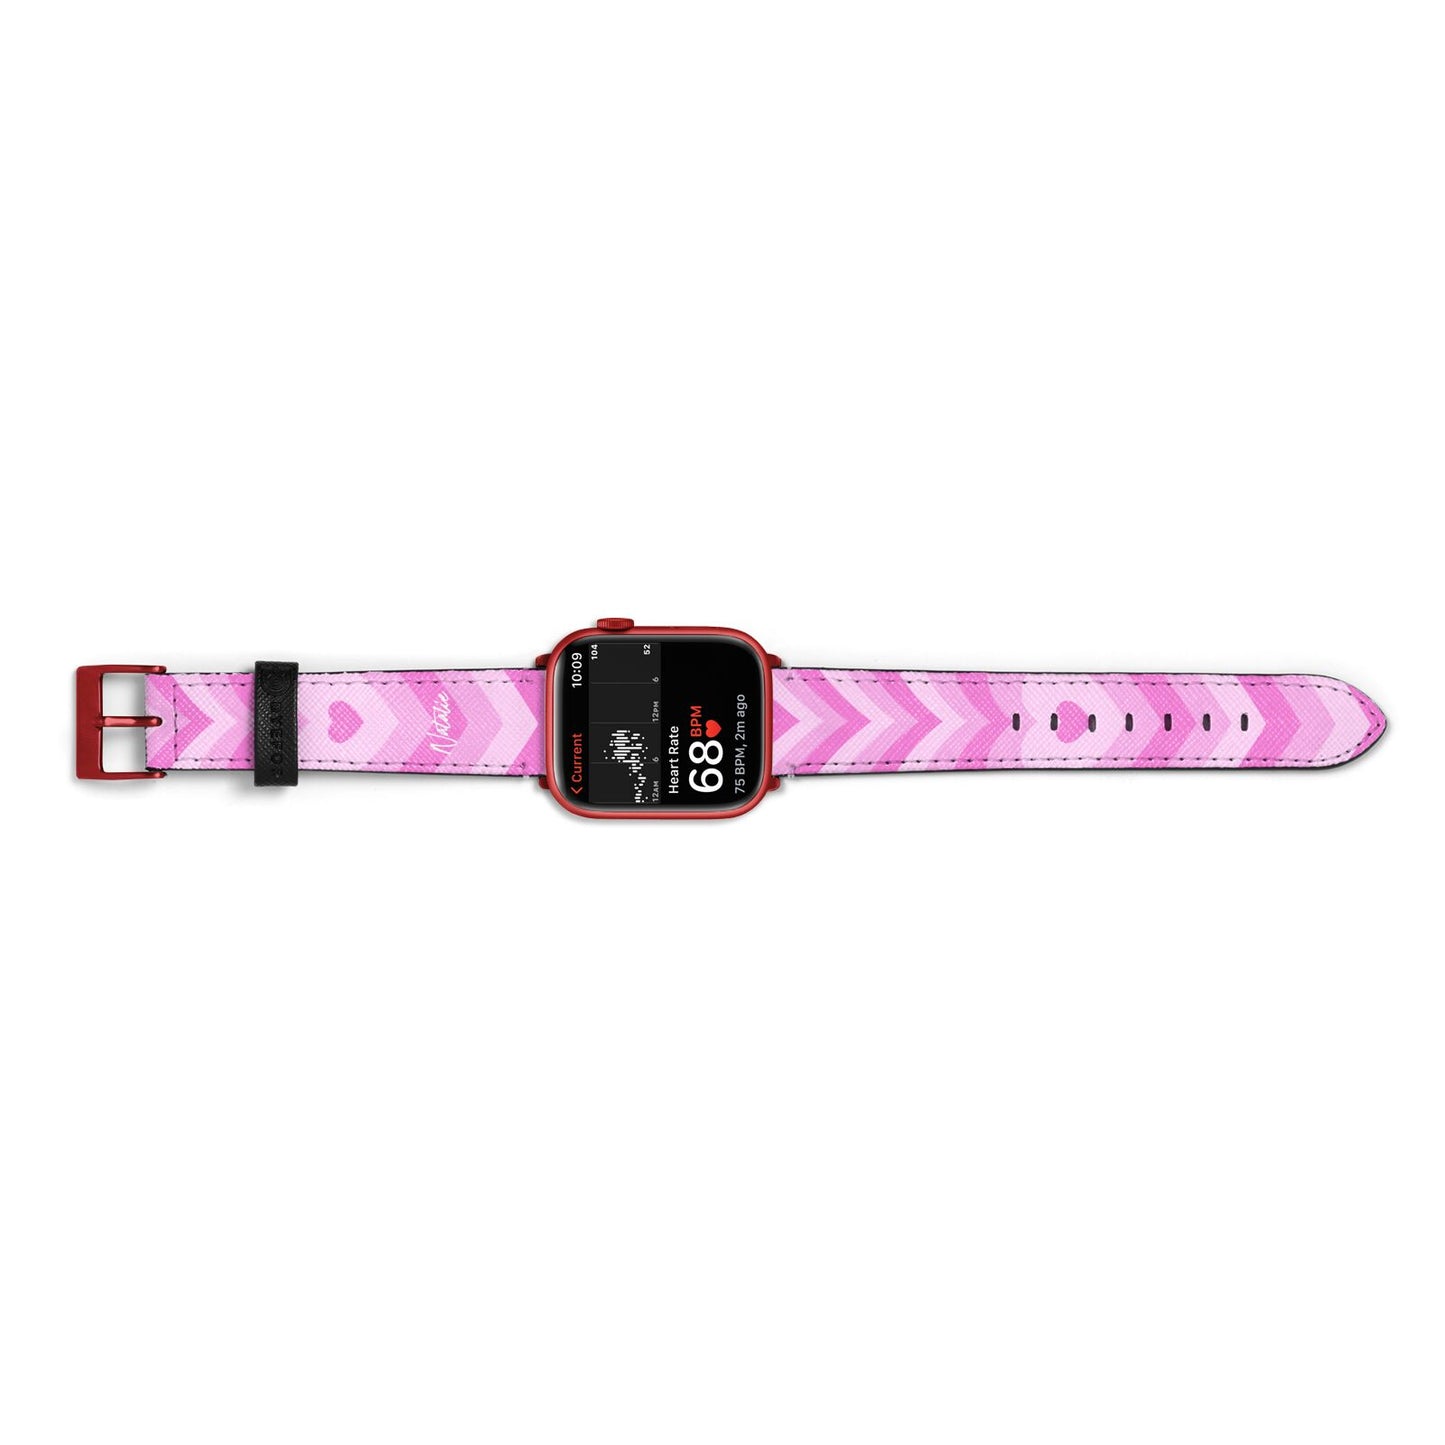 Personalised Pink Heart Apple Watch Strap Size 38mm Landscape Image Red Hardware